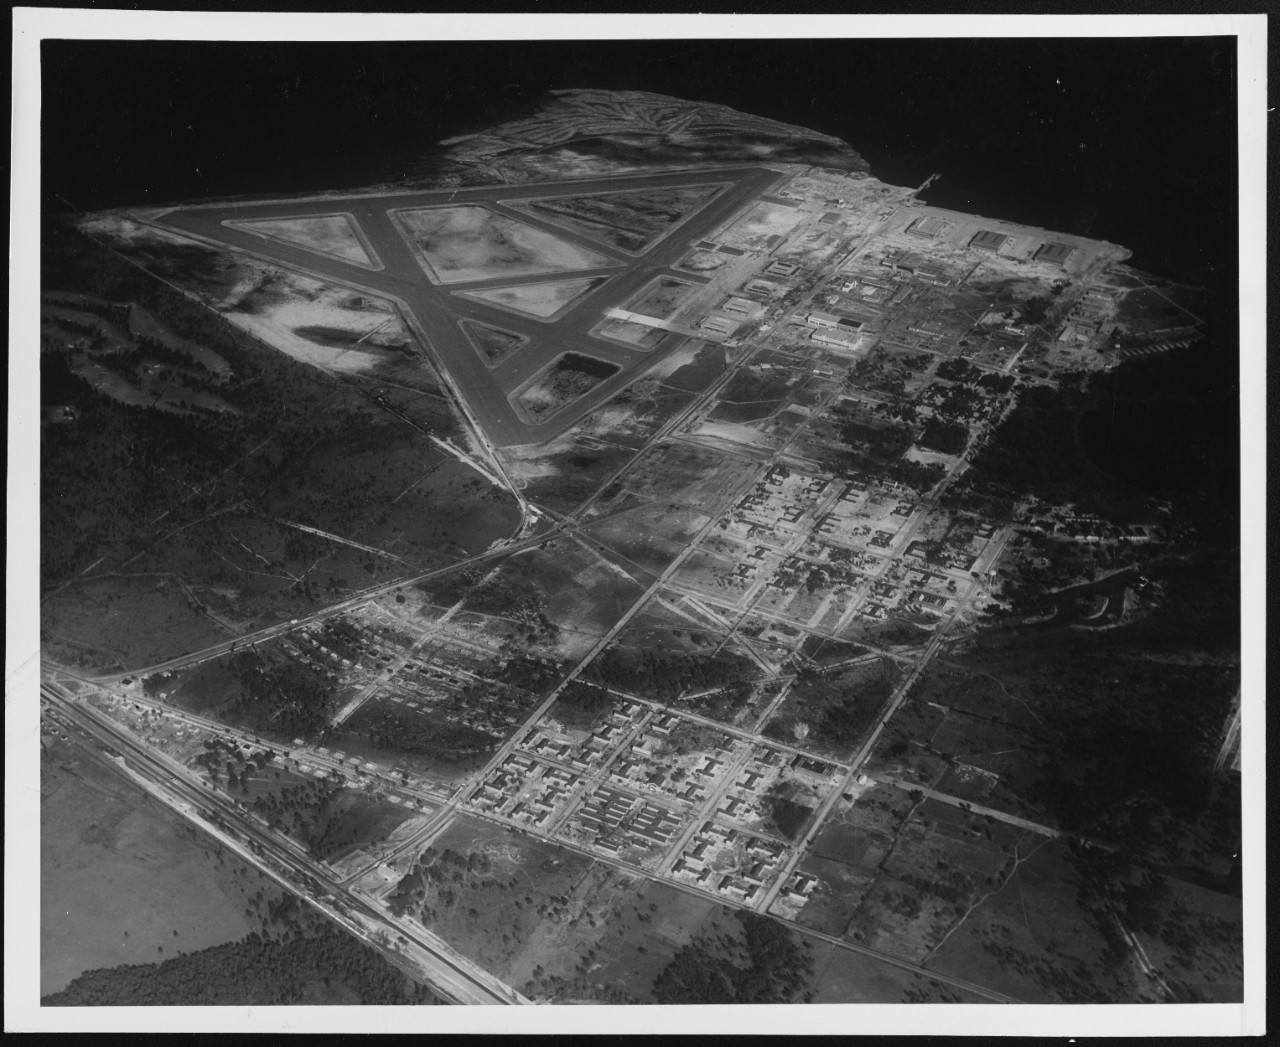 Aerial photograph of U.S. Naval Air Station, Jacksonville, Florida, February 15, 1941